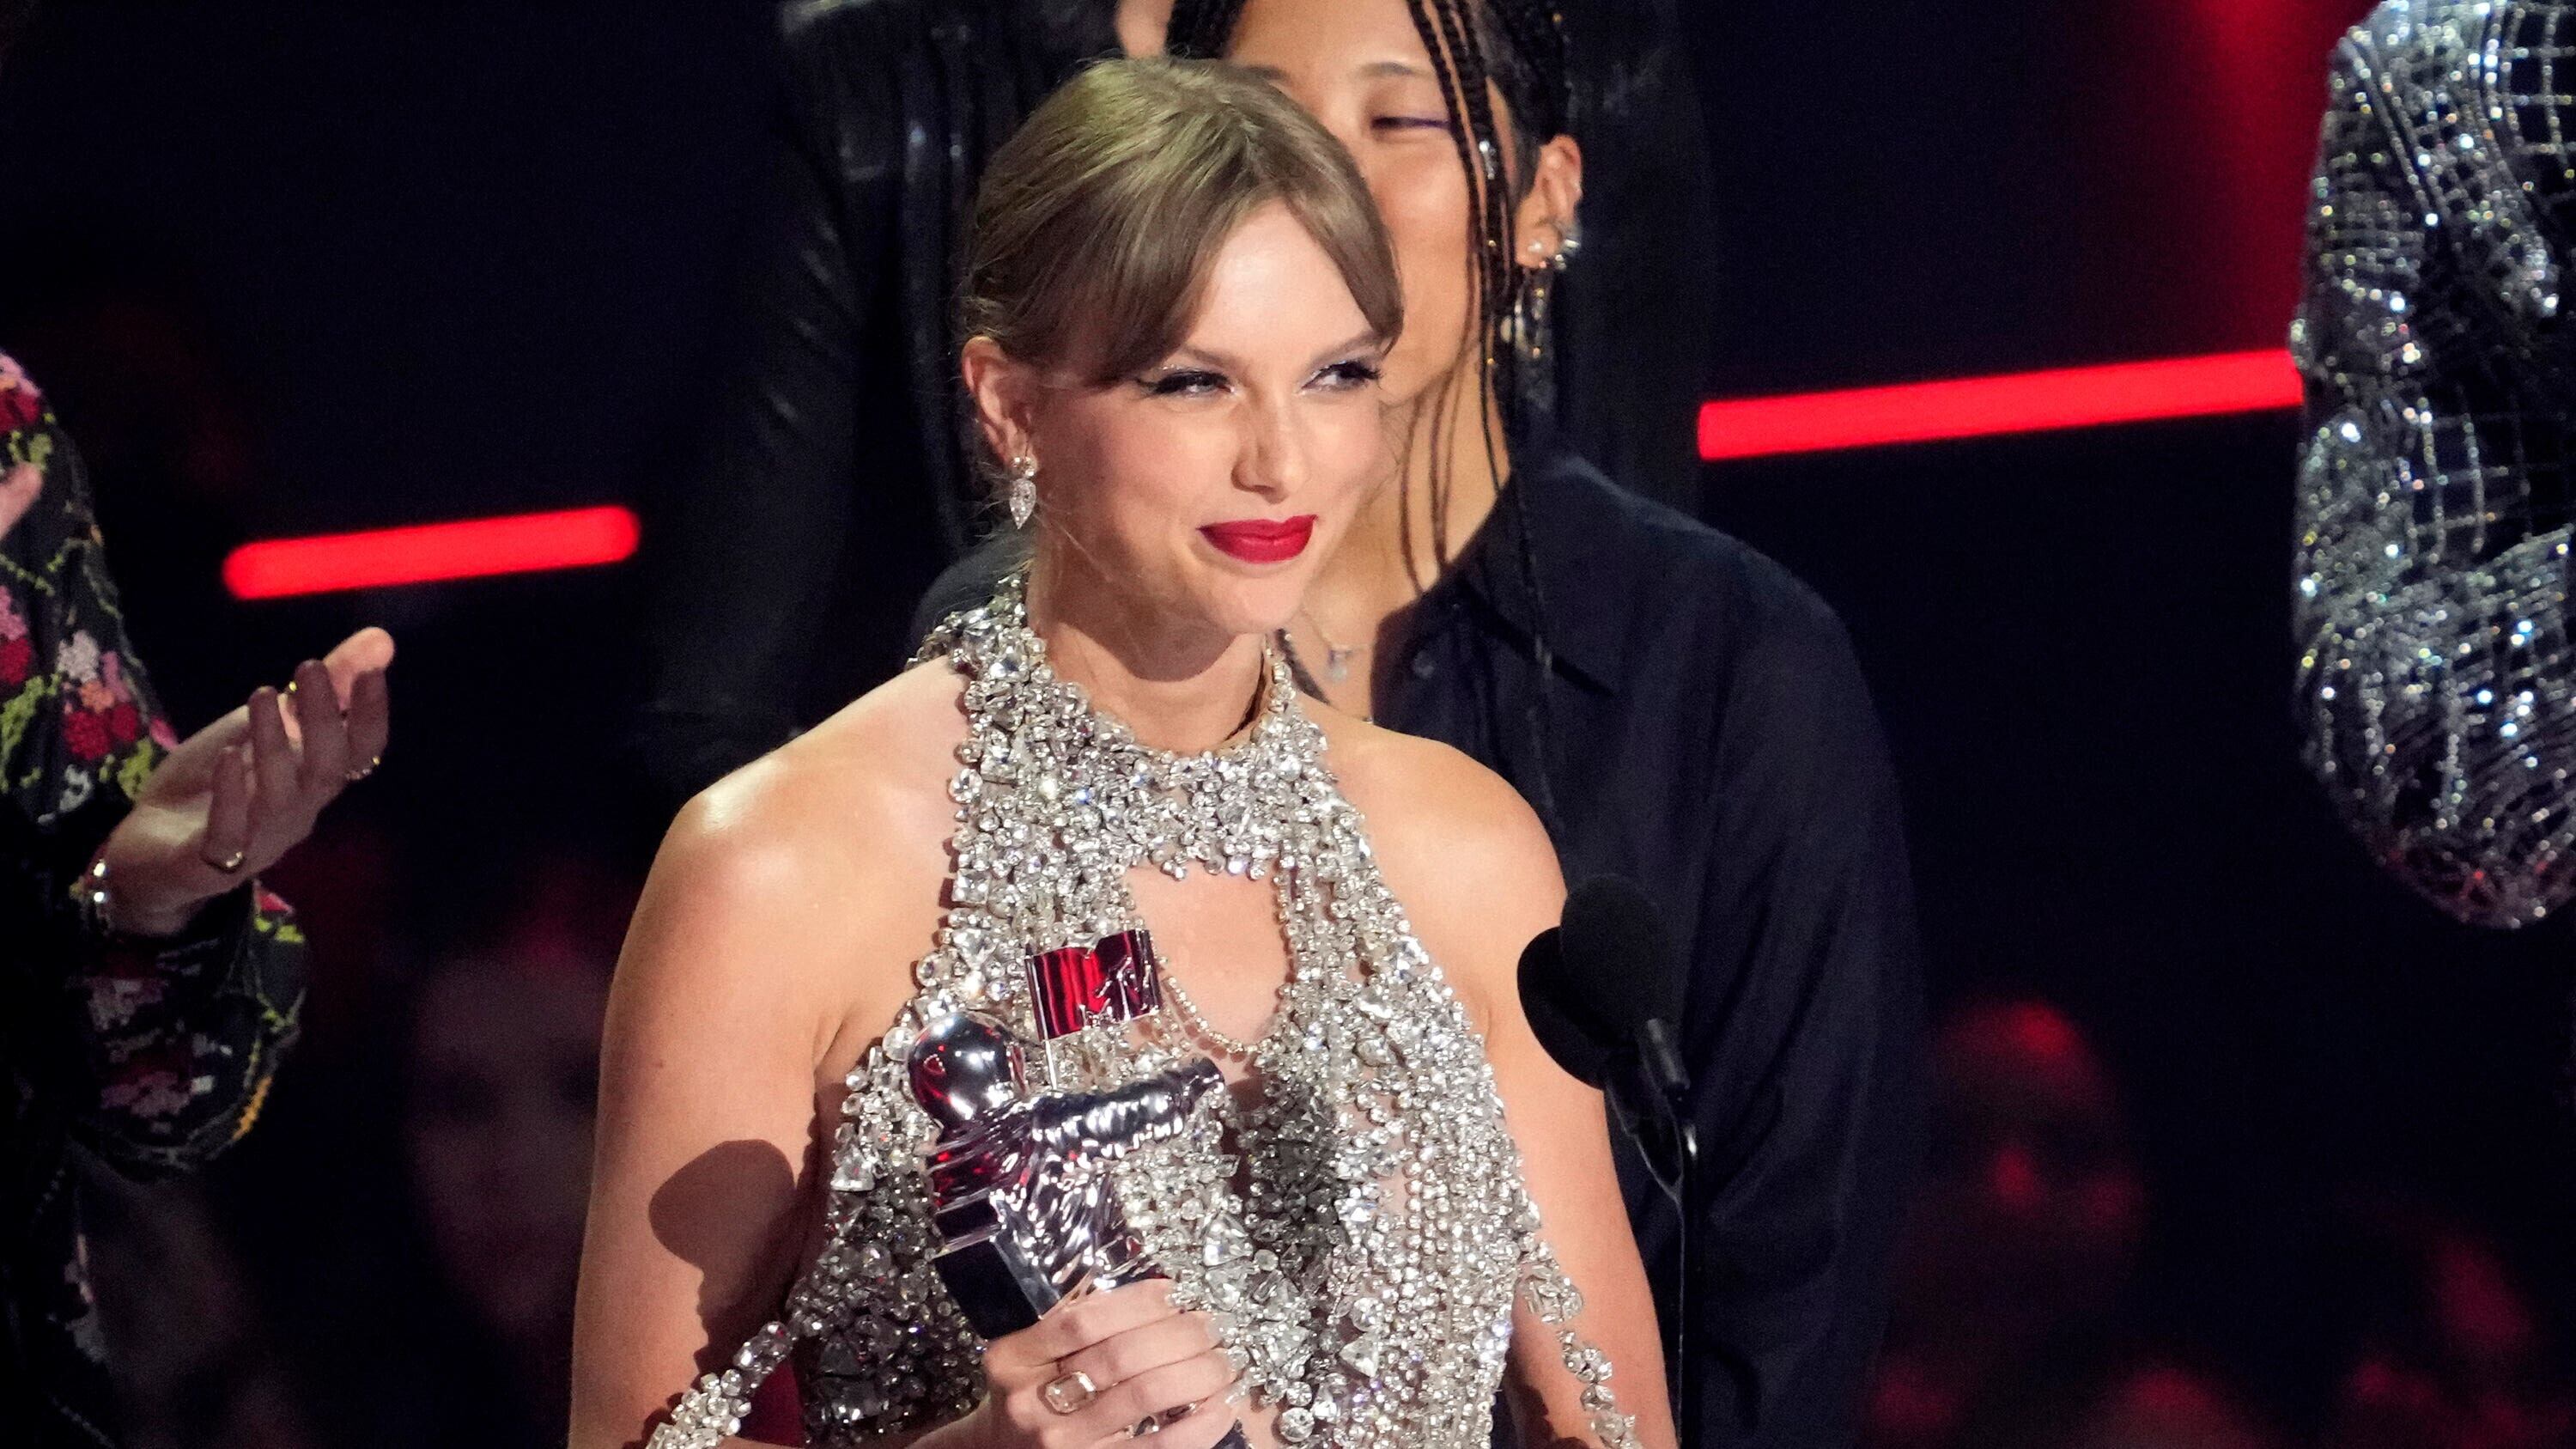 The pop megastar took home several awards on the night her video for All Too Well (10 Minute Version) (Taylor’s Version).